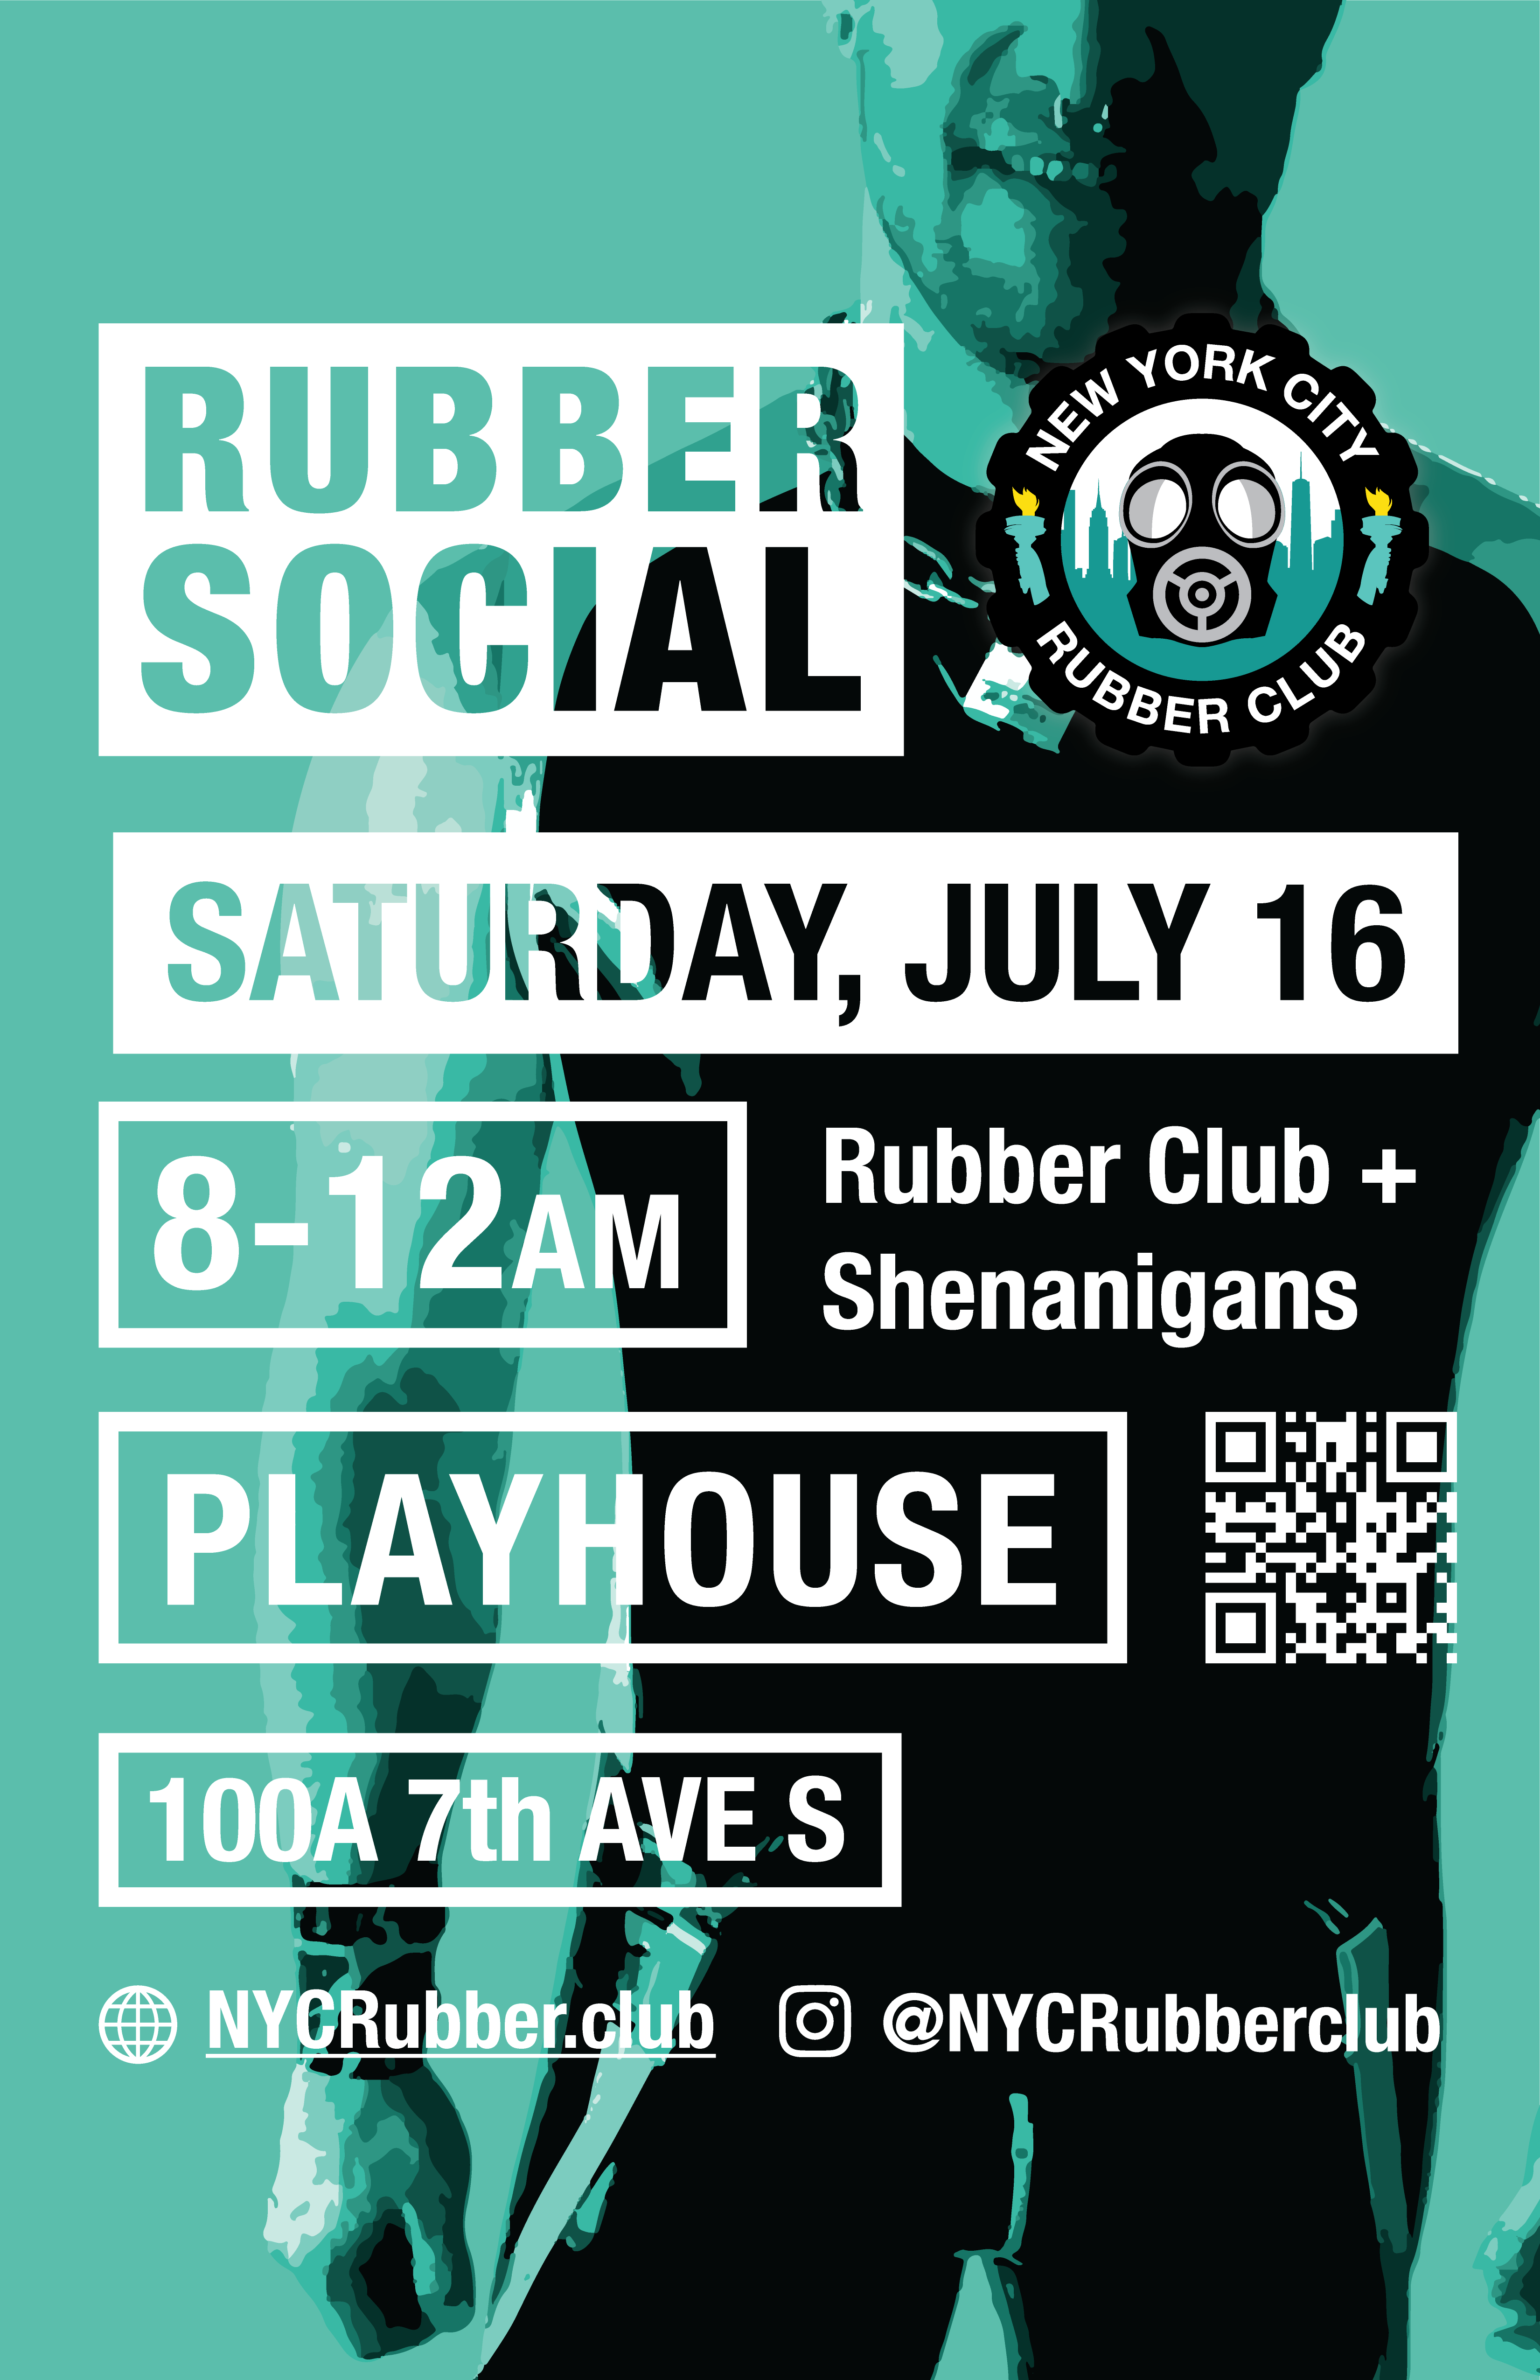 A NYC Rubber Club party joining Schenanigans at Playhouse Bar 8pm-12am Sat 16th Jul